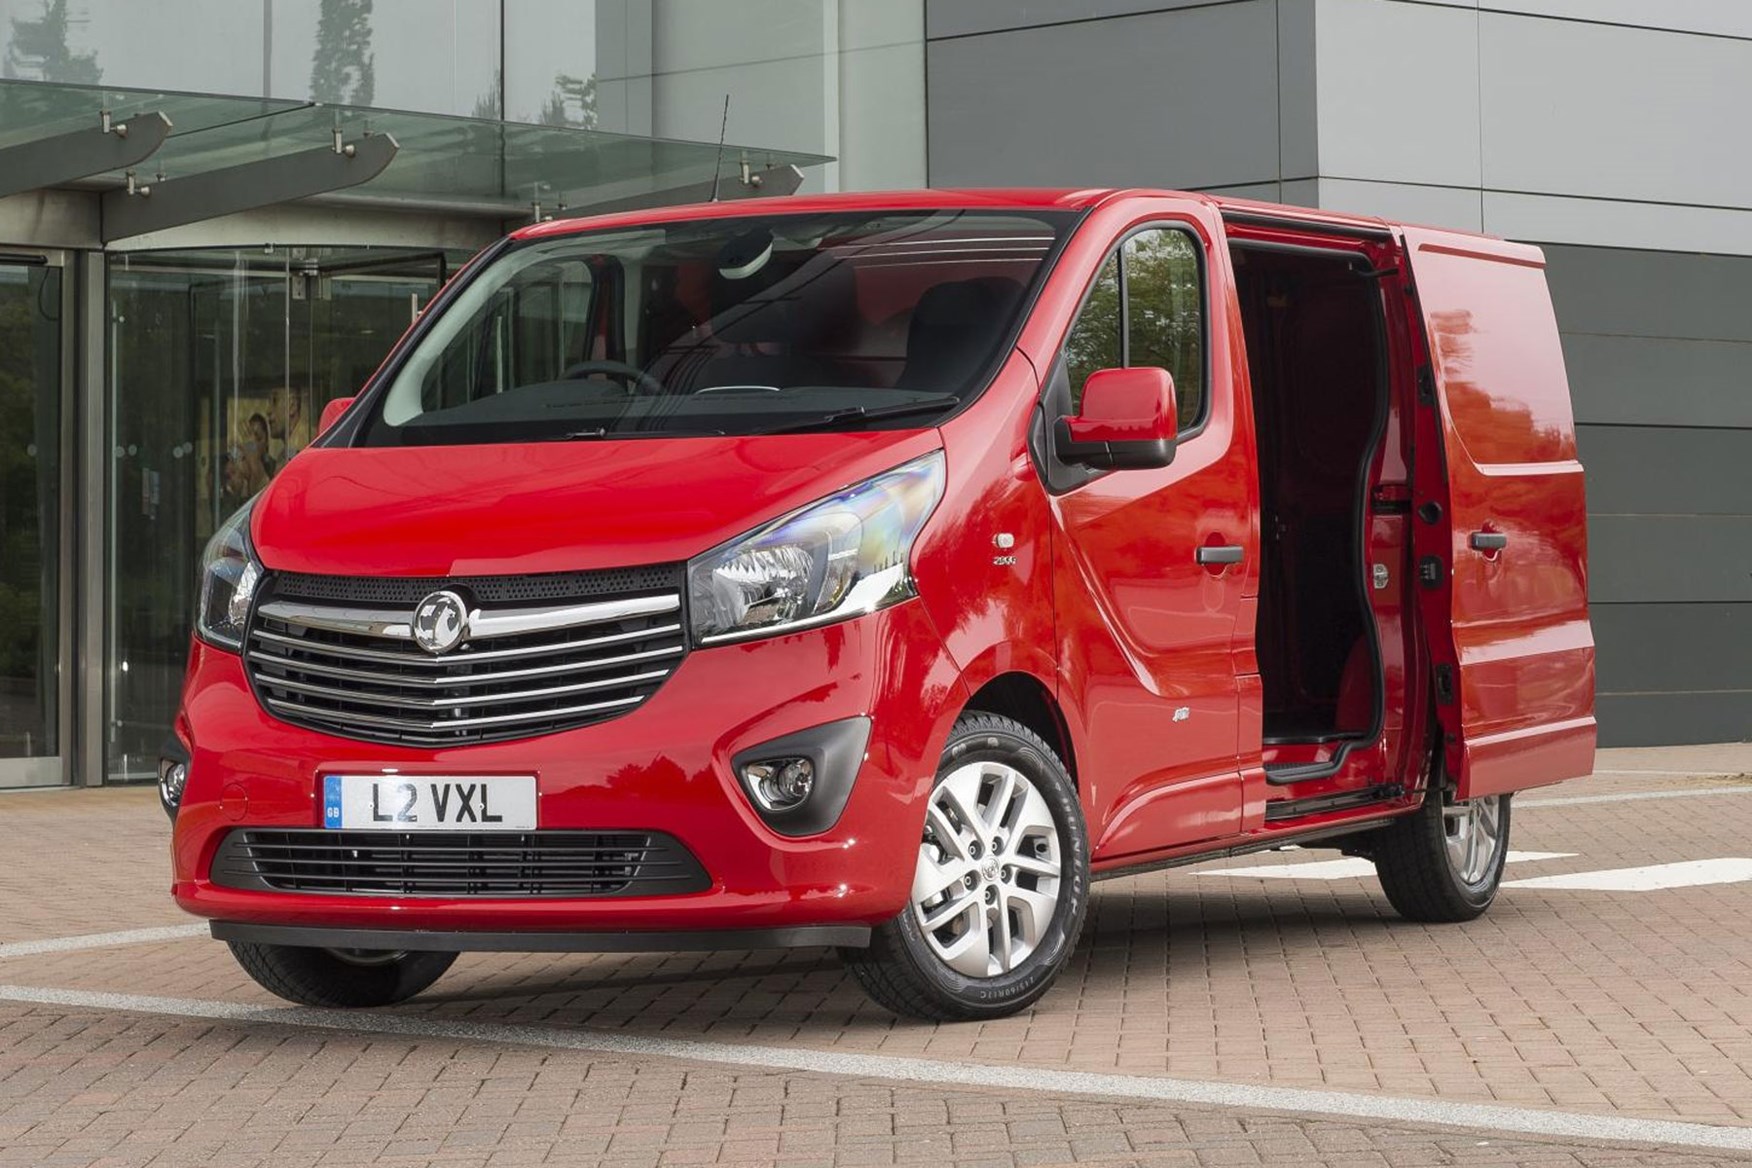 Vauxhall Vivaro dimension - front view, red, with sliding side door open